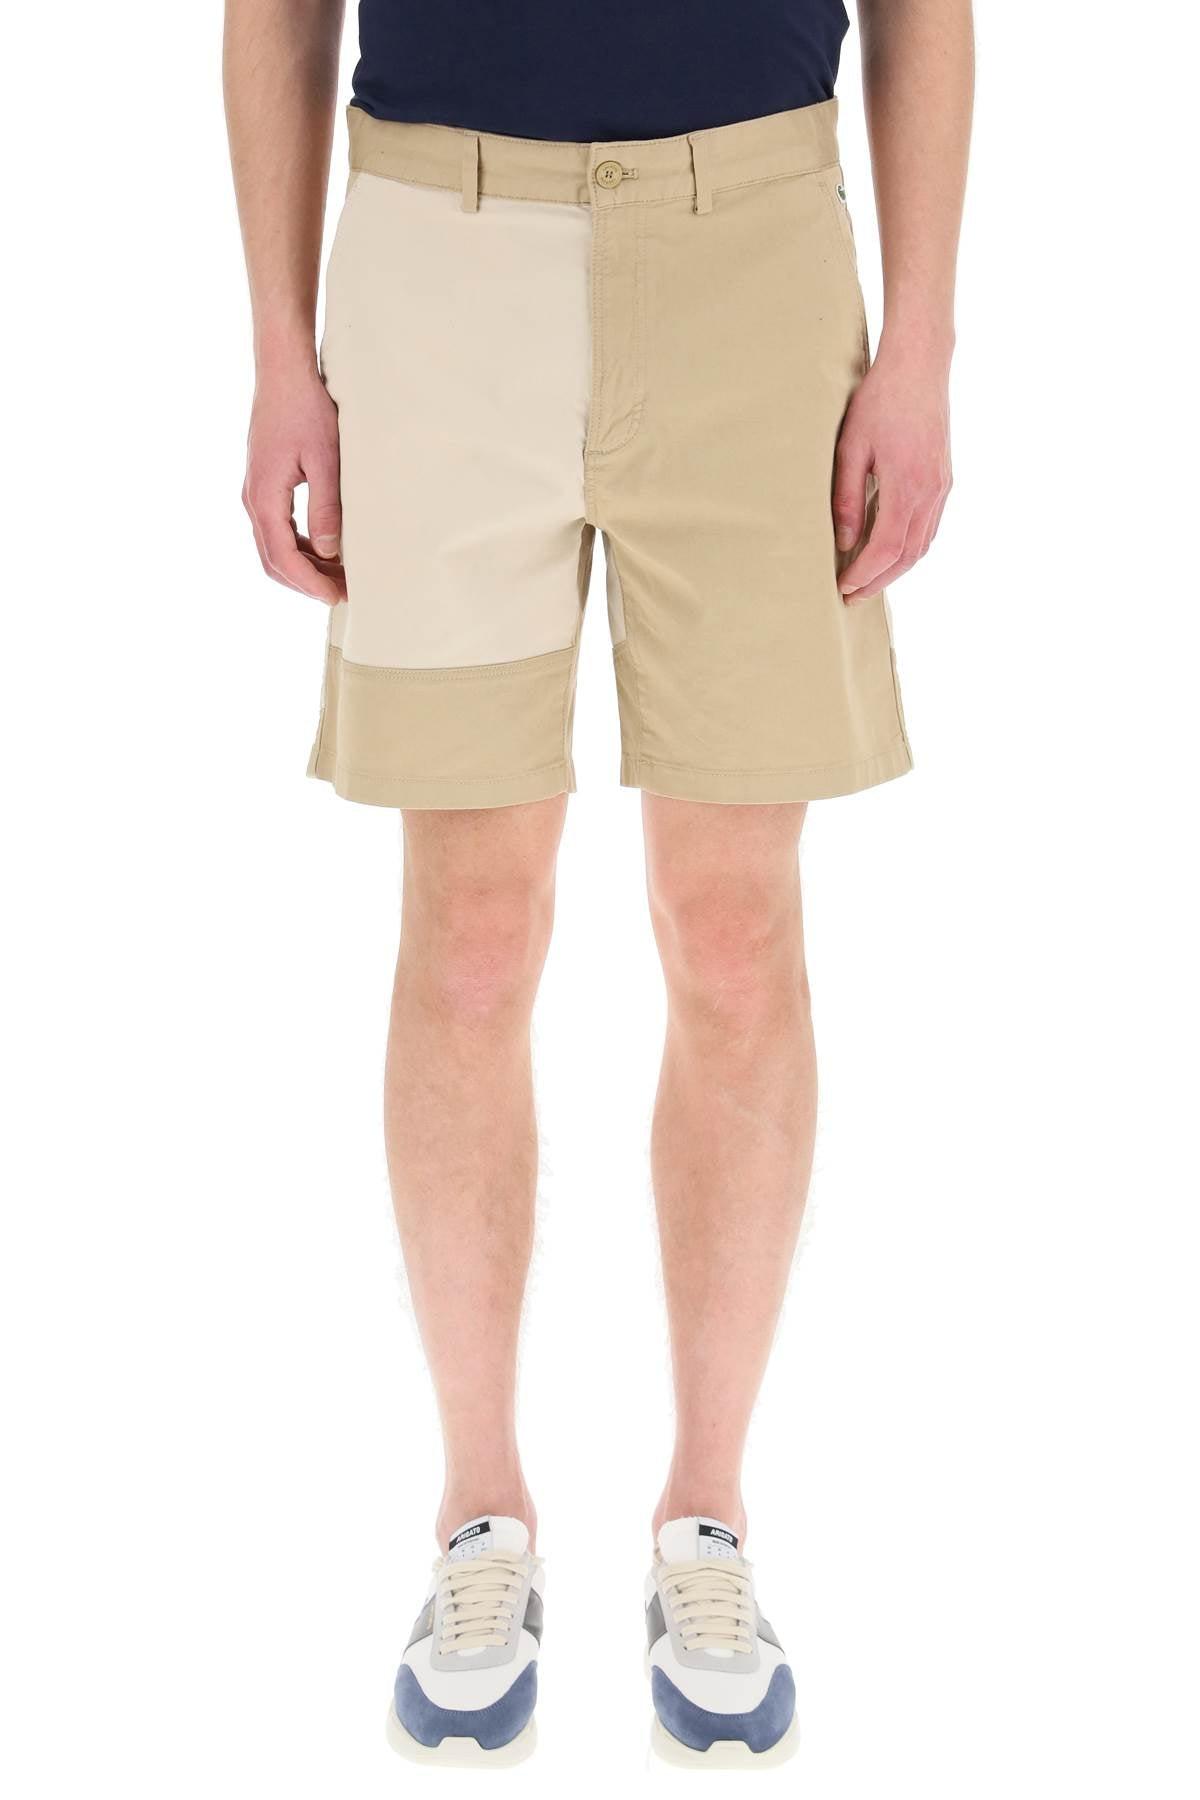 Lacoste Live Patchwork Shorts In Organic Cotton in Natural for Men | Lyst